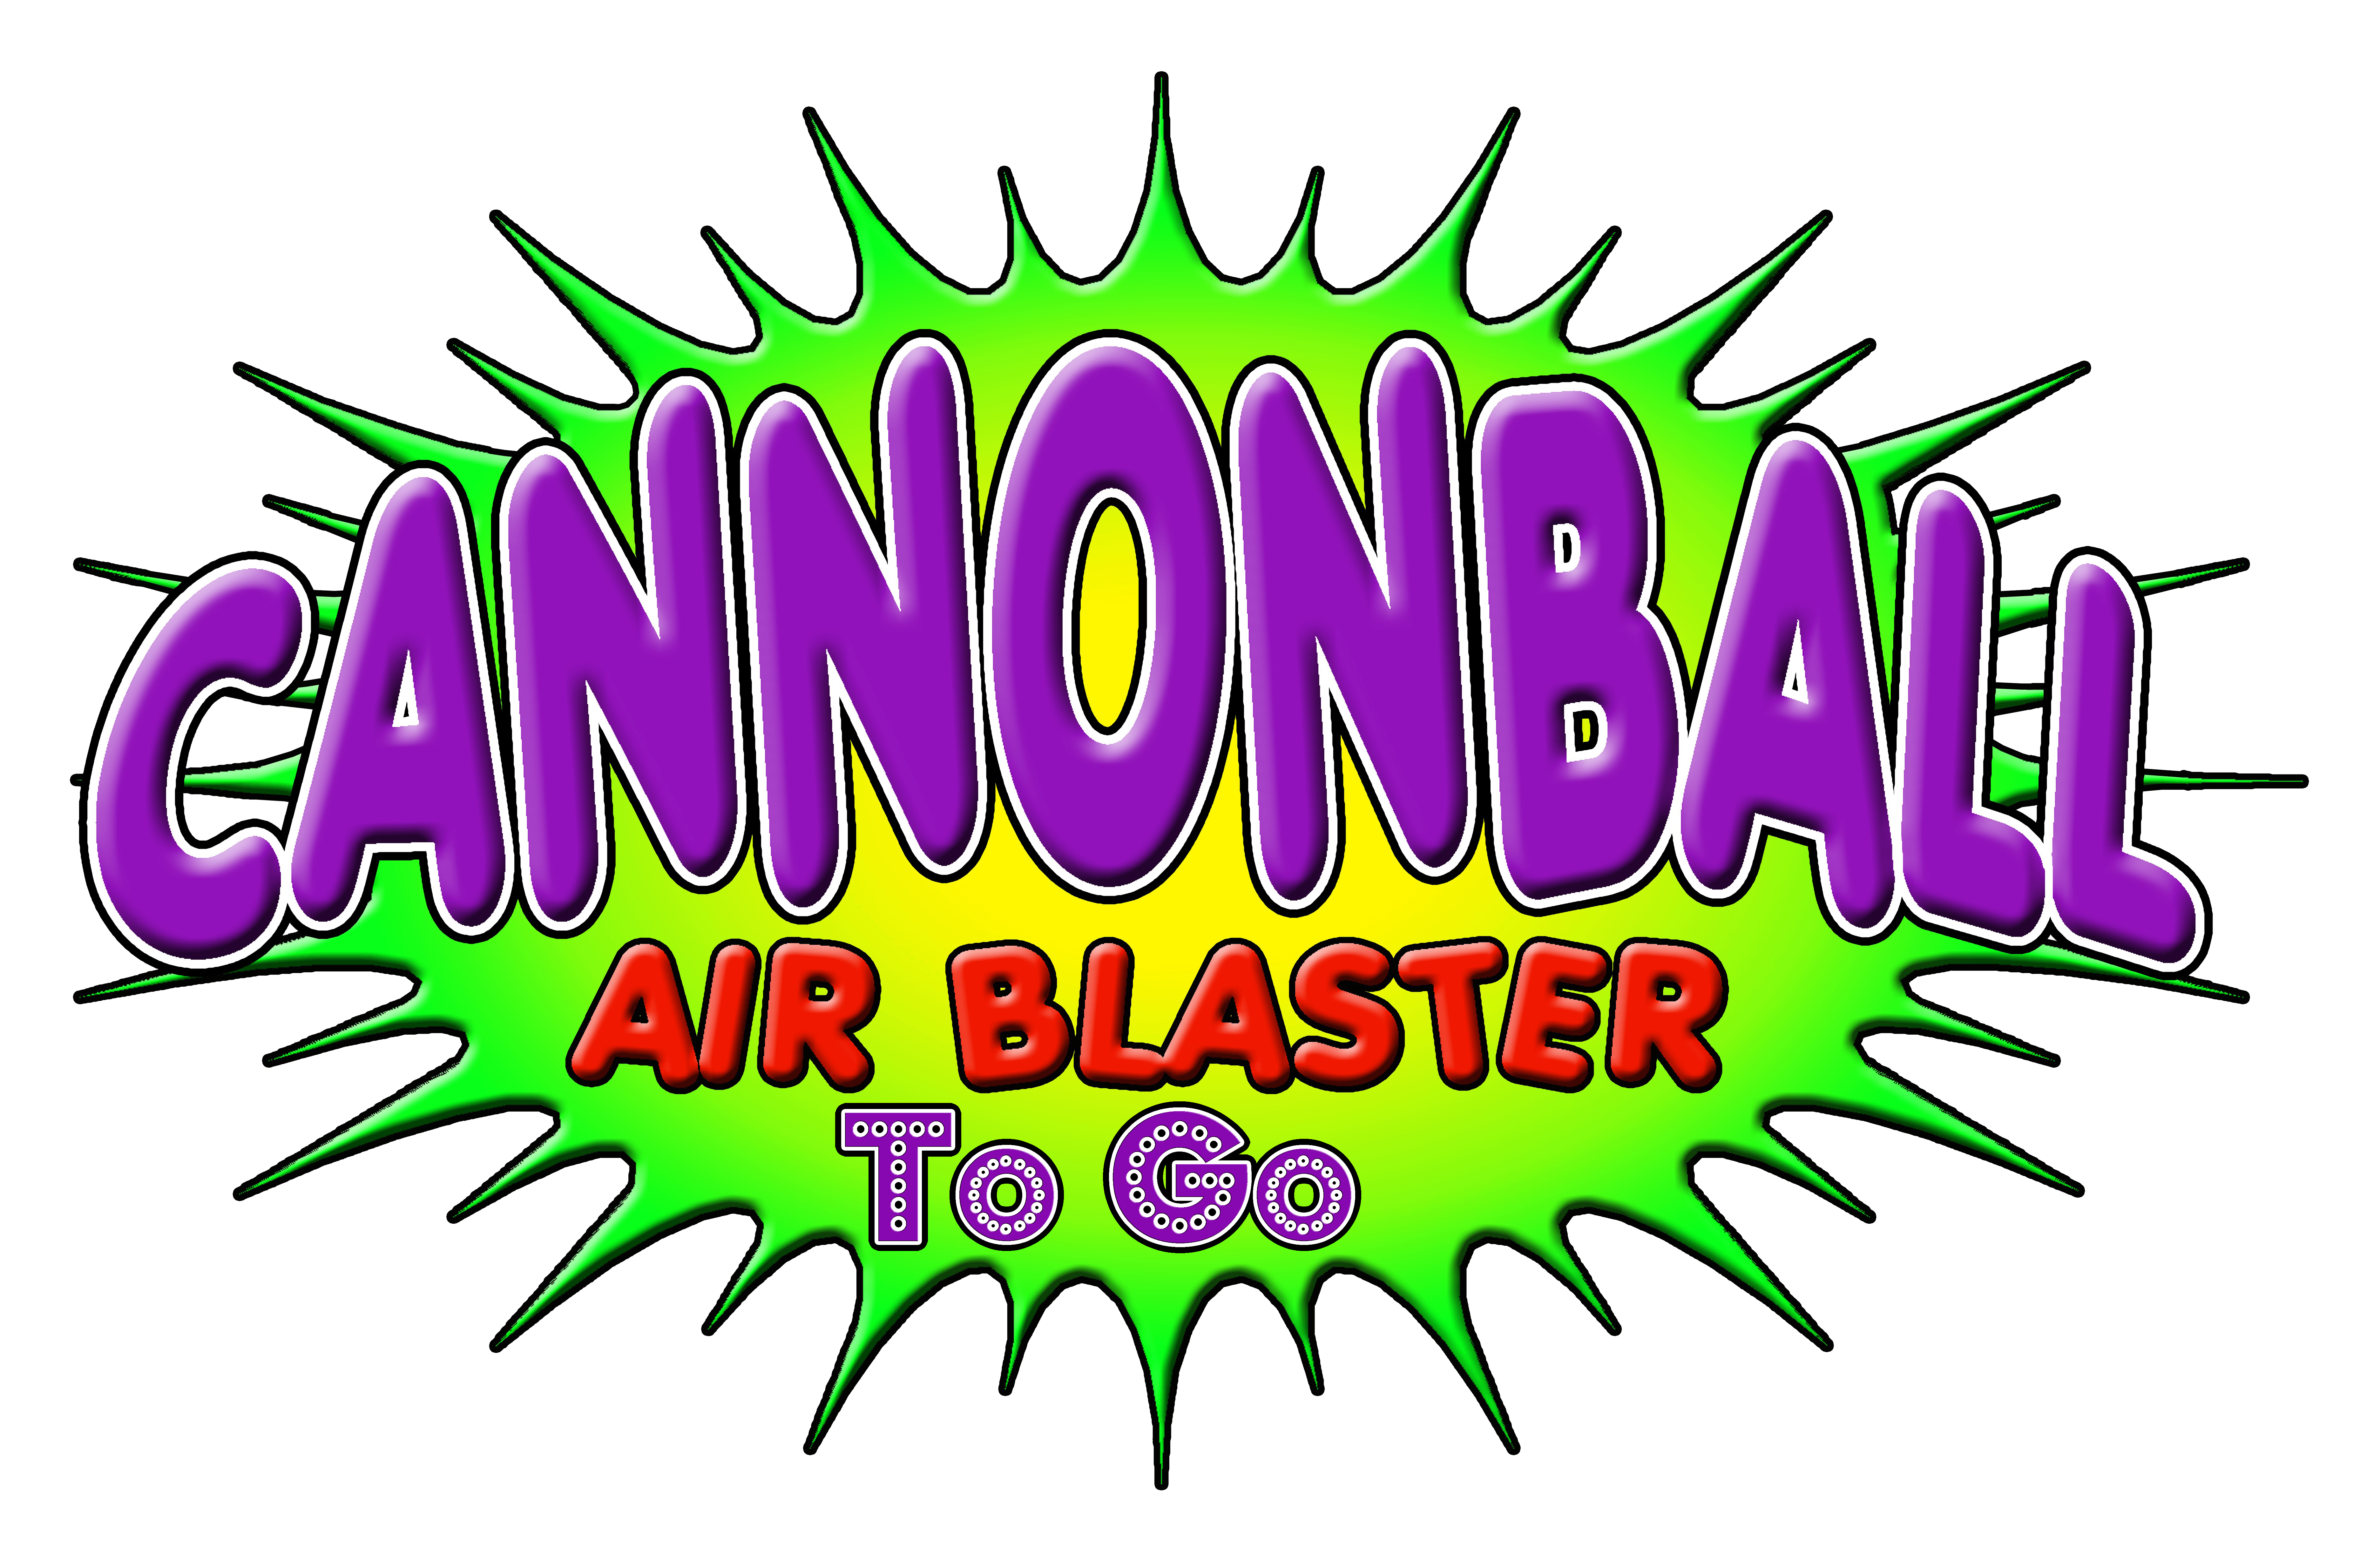 Airblaster Logo - To Go Events Cannonball Air Blaster Logo To Go Clear BG - To Go Events